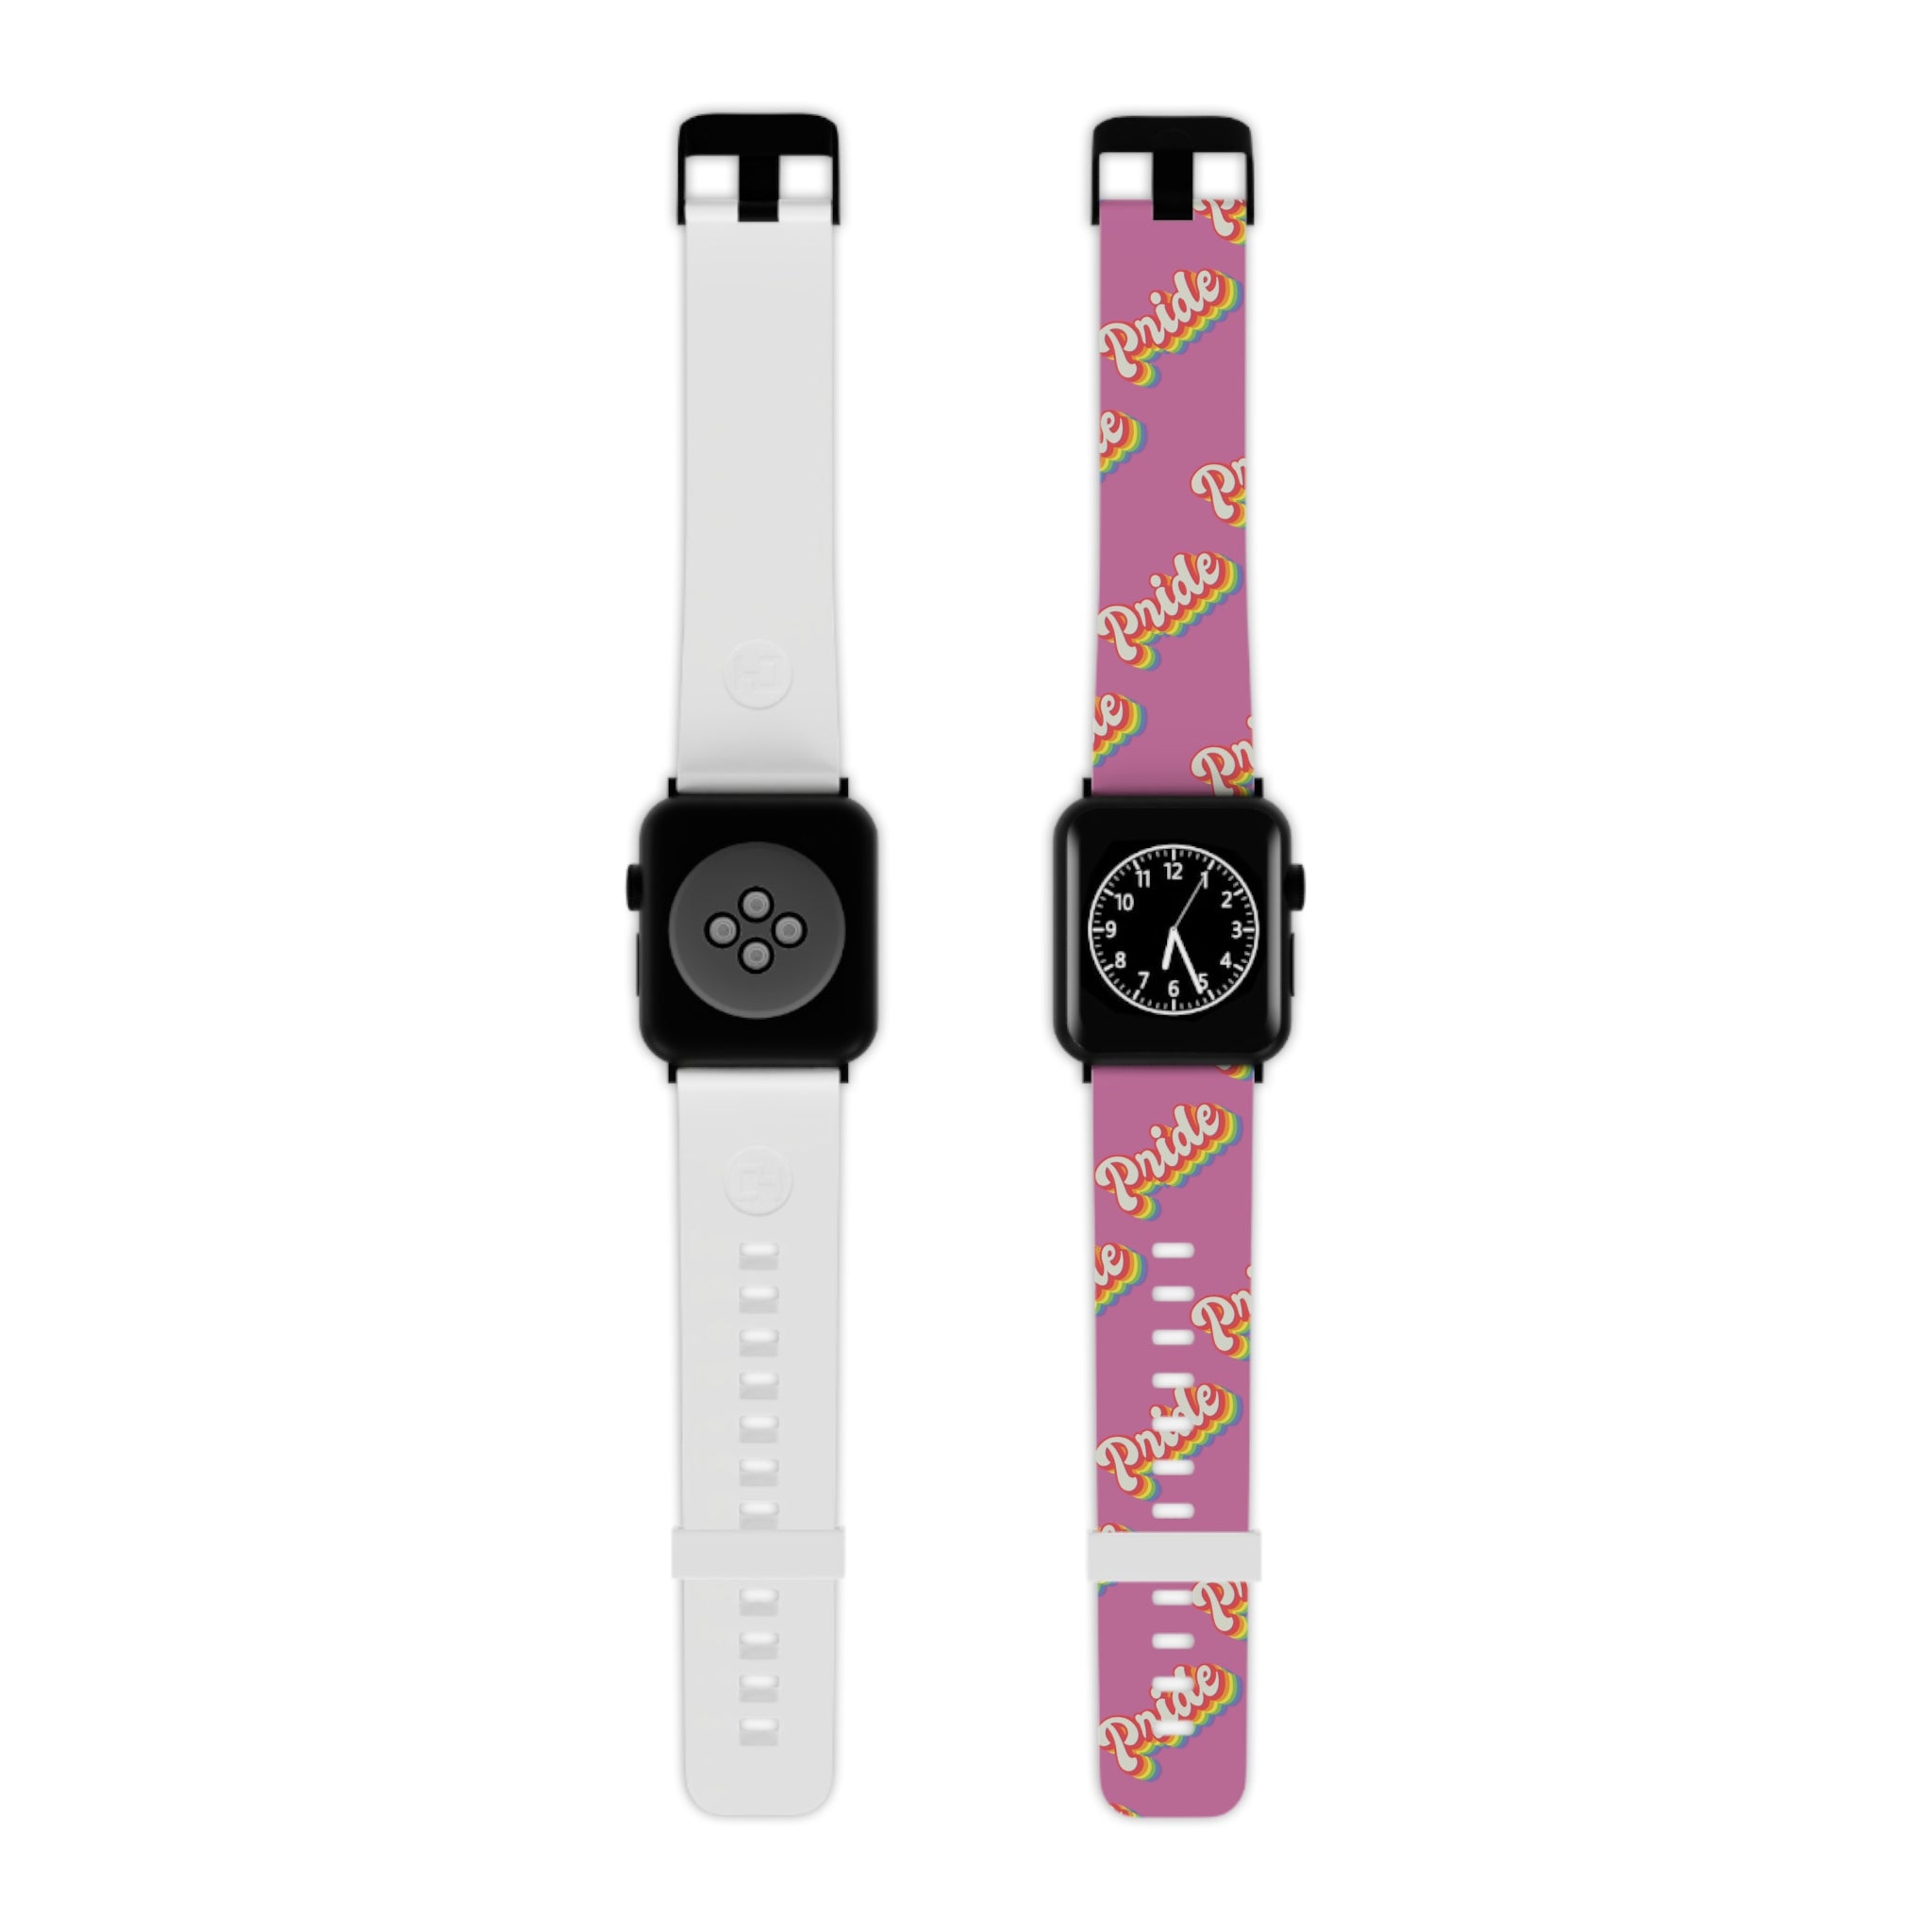 A custom-printed, fashionable alternative Pride Band for Apple Watch T-Shirt in pink and white.